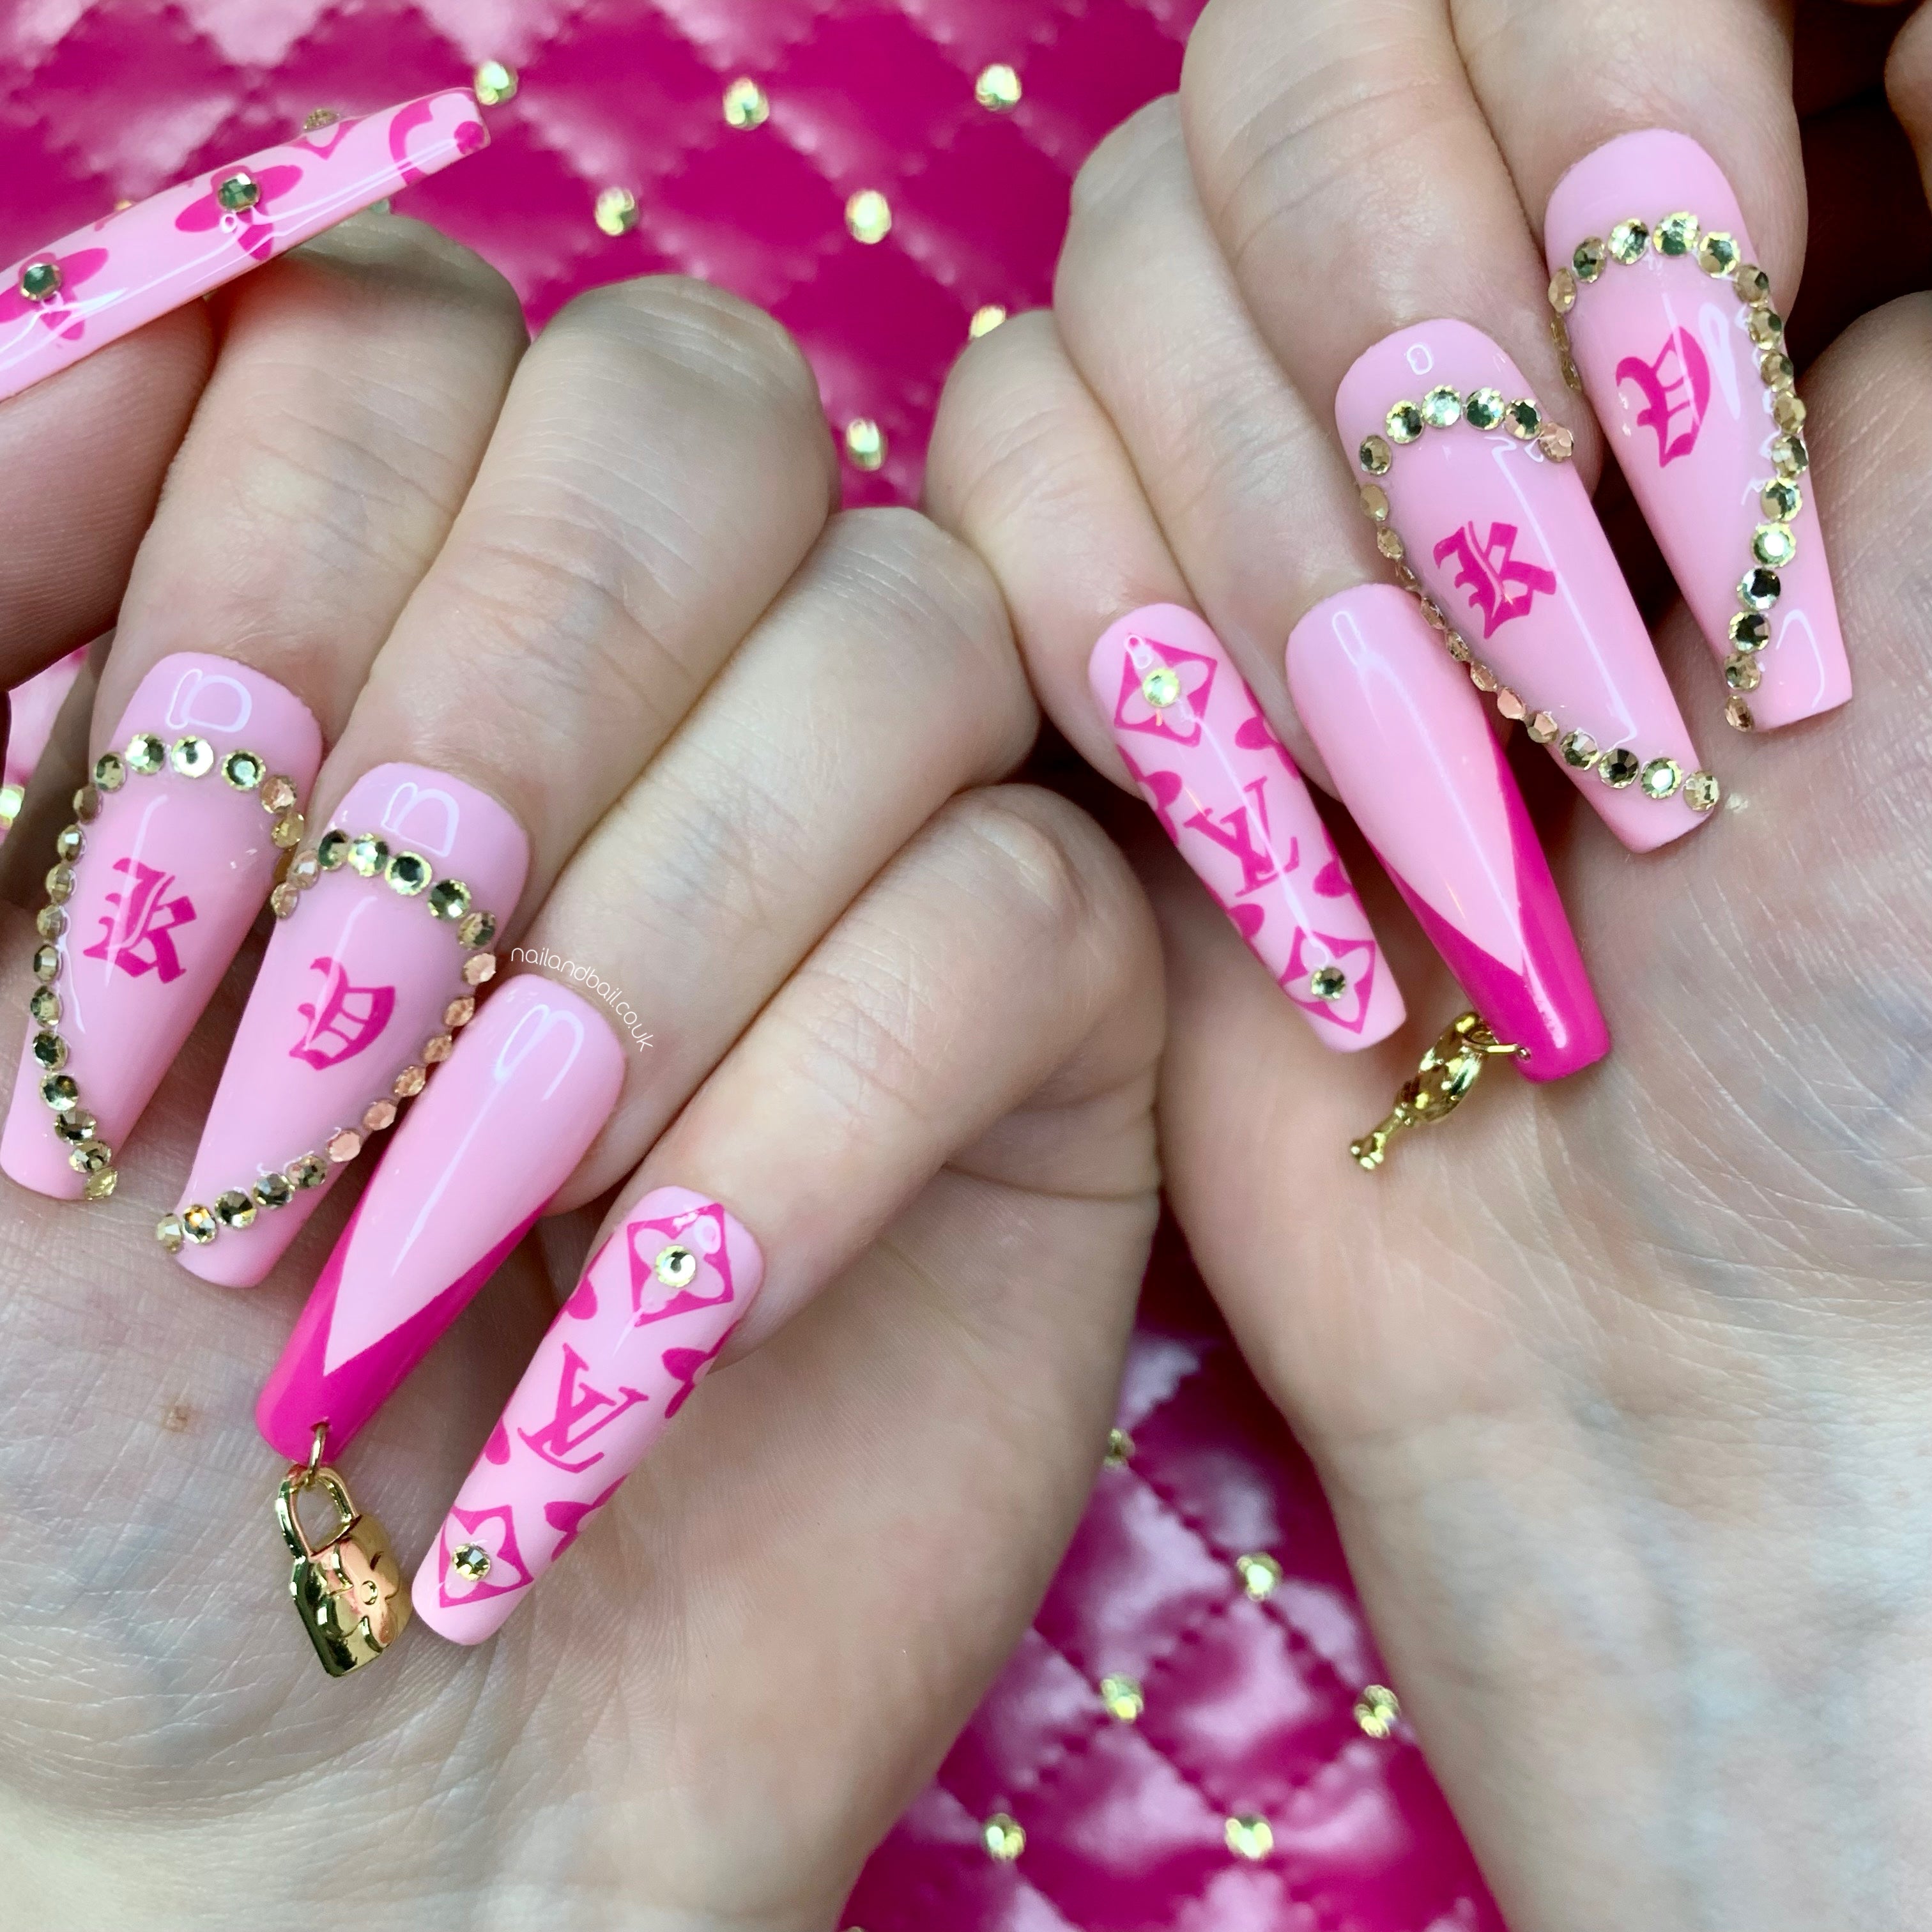 Pink Louis Vuitton Nails You Havent Seen Yet  Ice Cream whispers Clara